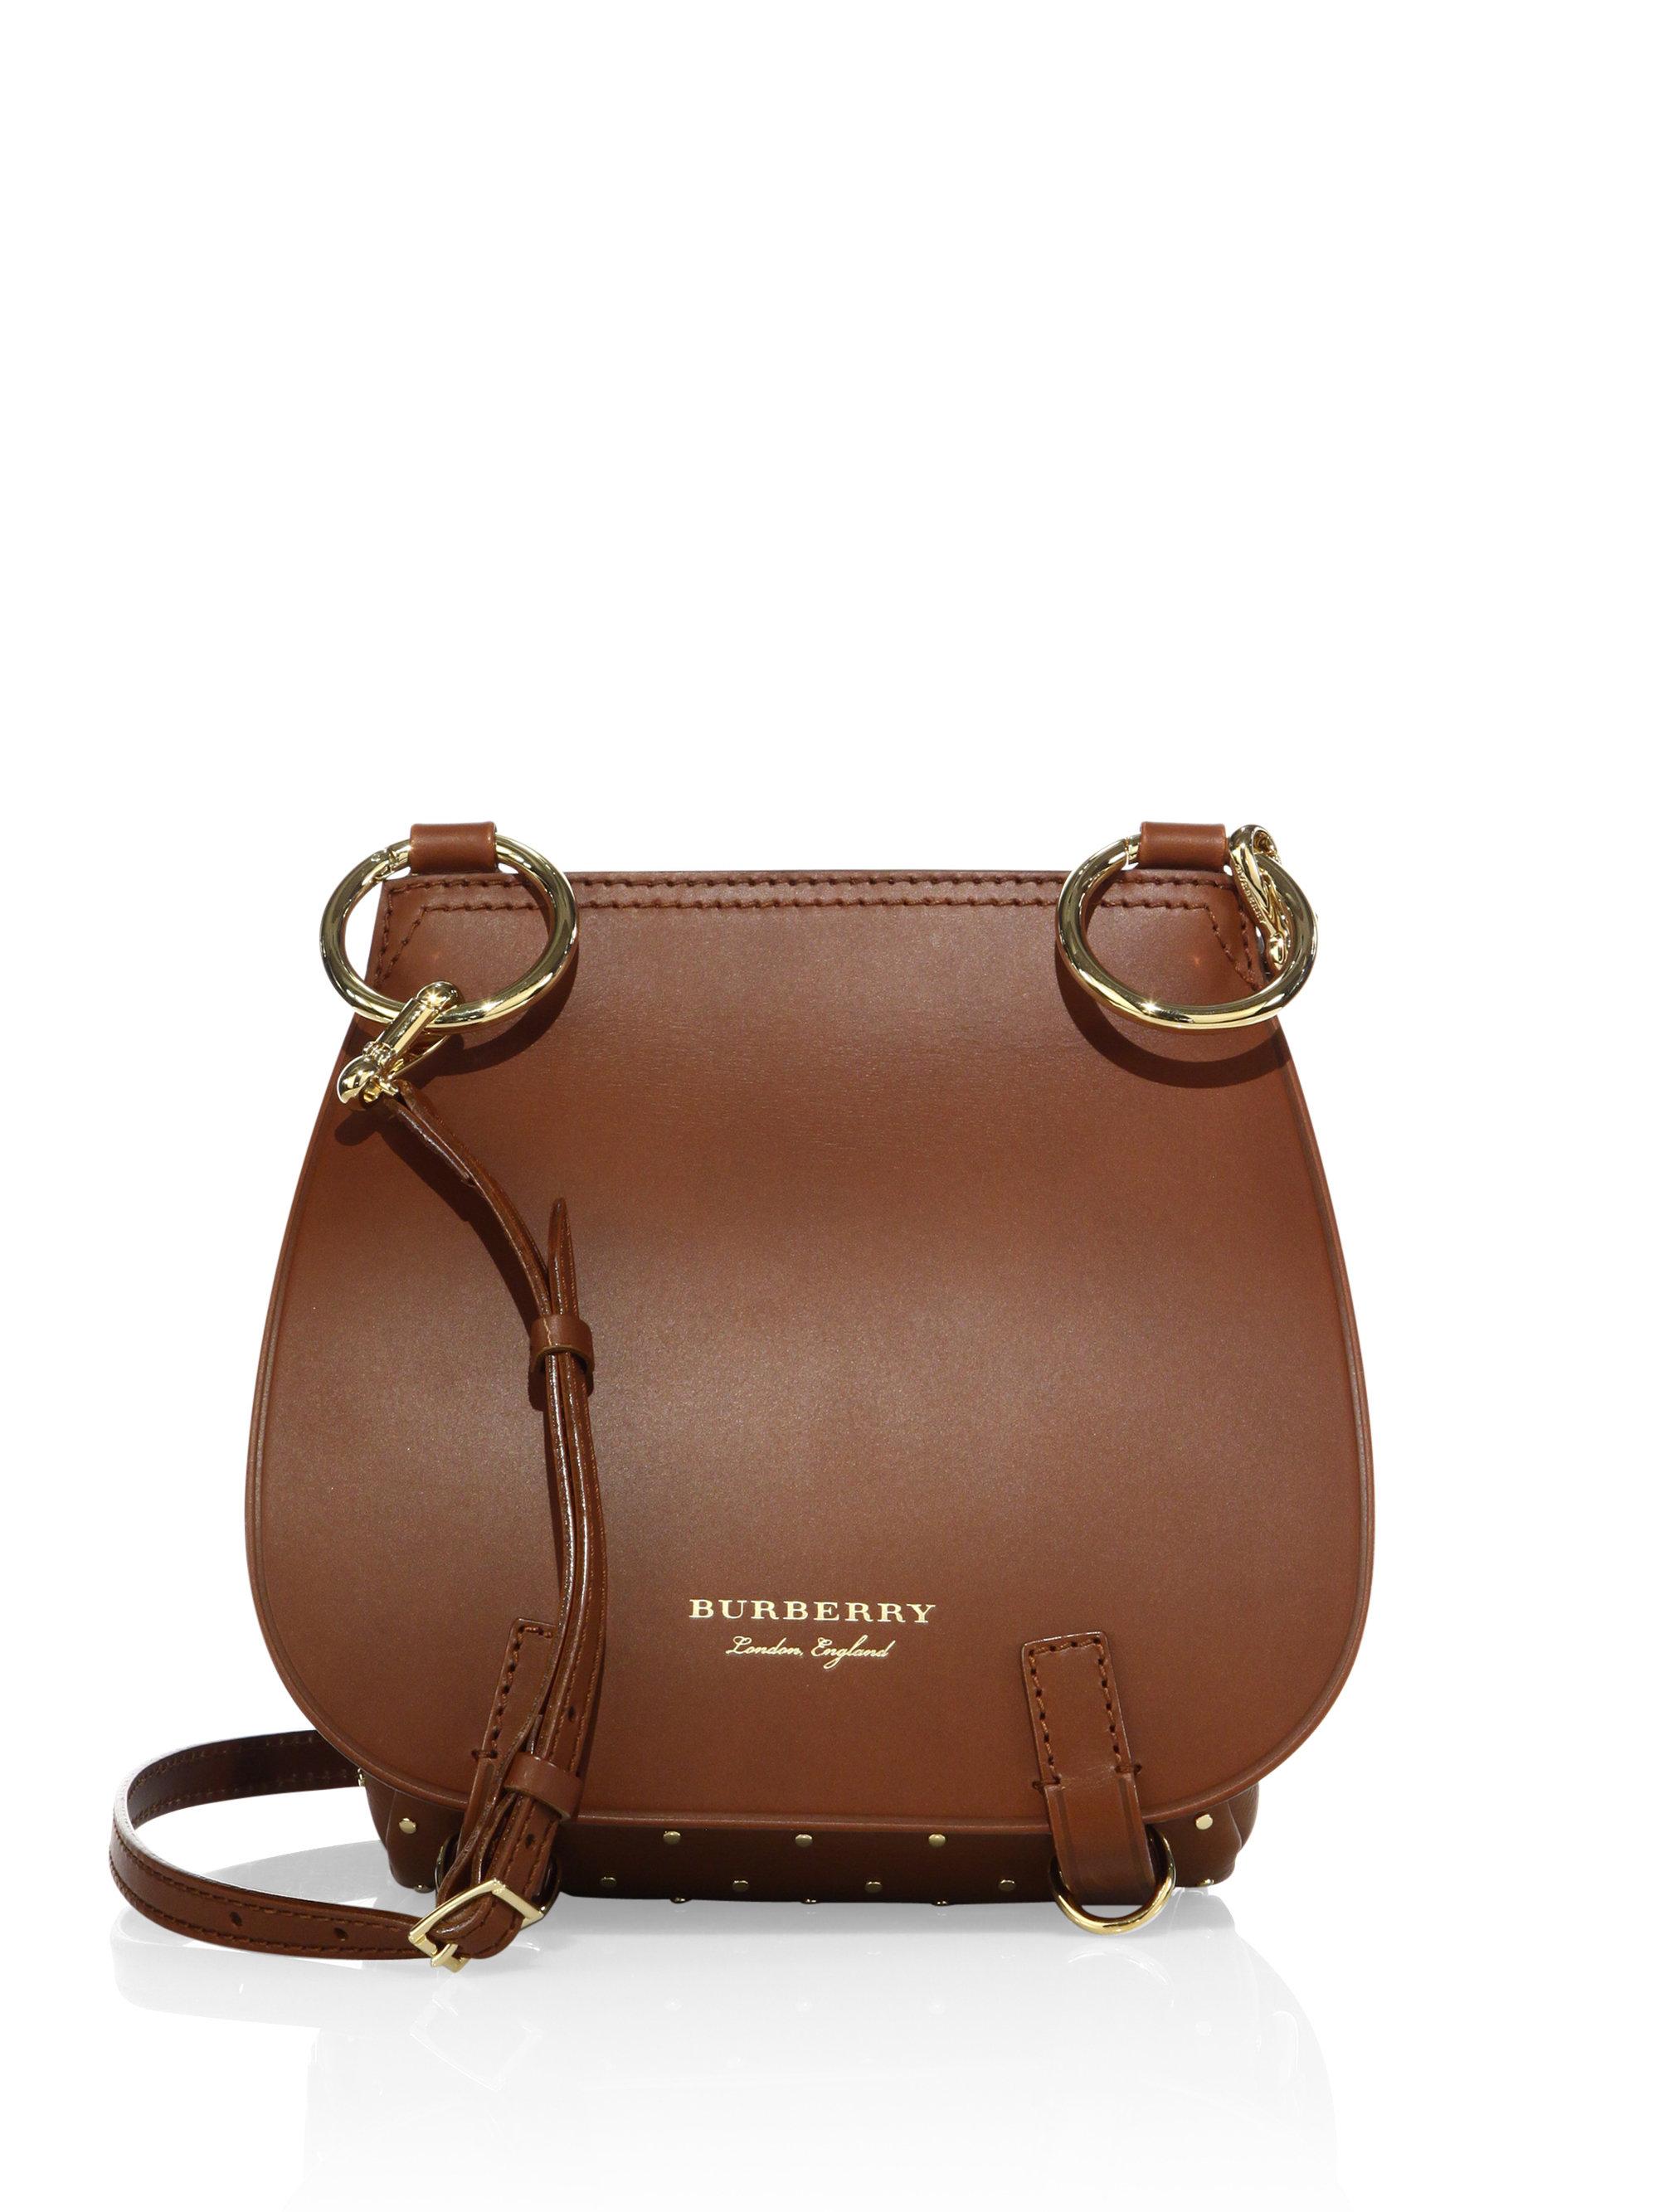 Burberry Bridle Riveted Leather Saddle Bag - Lyst